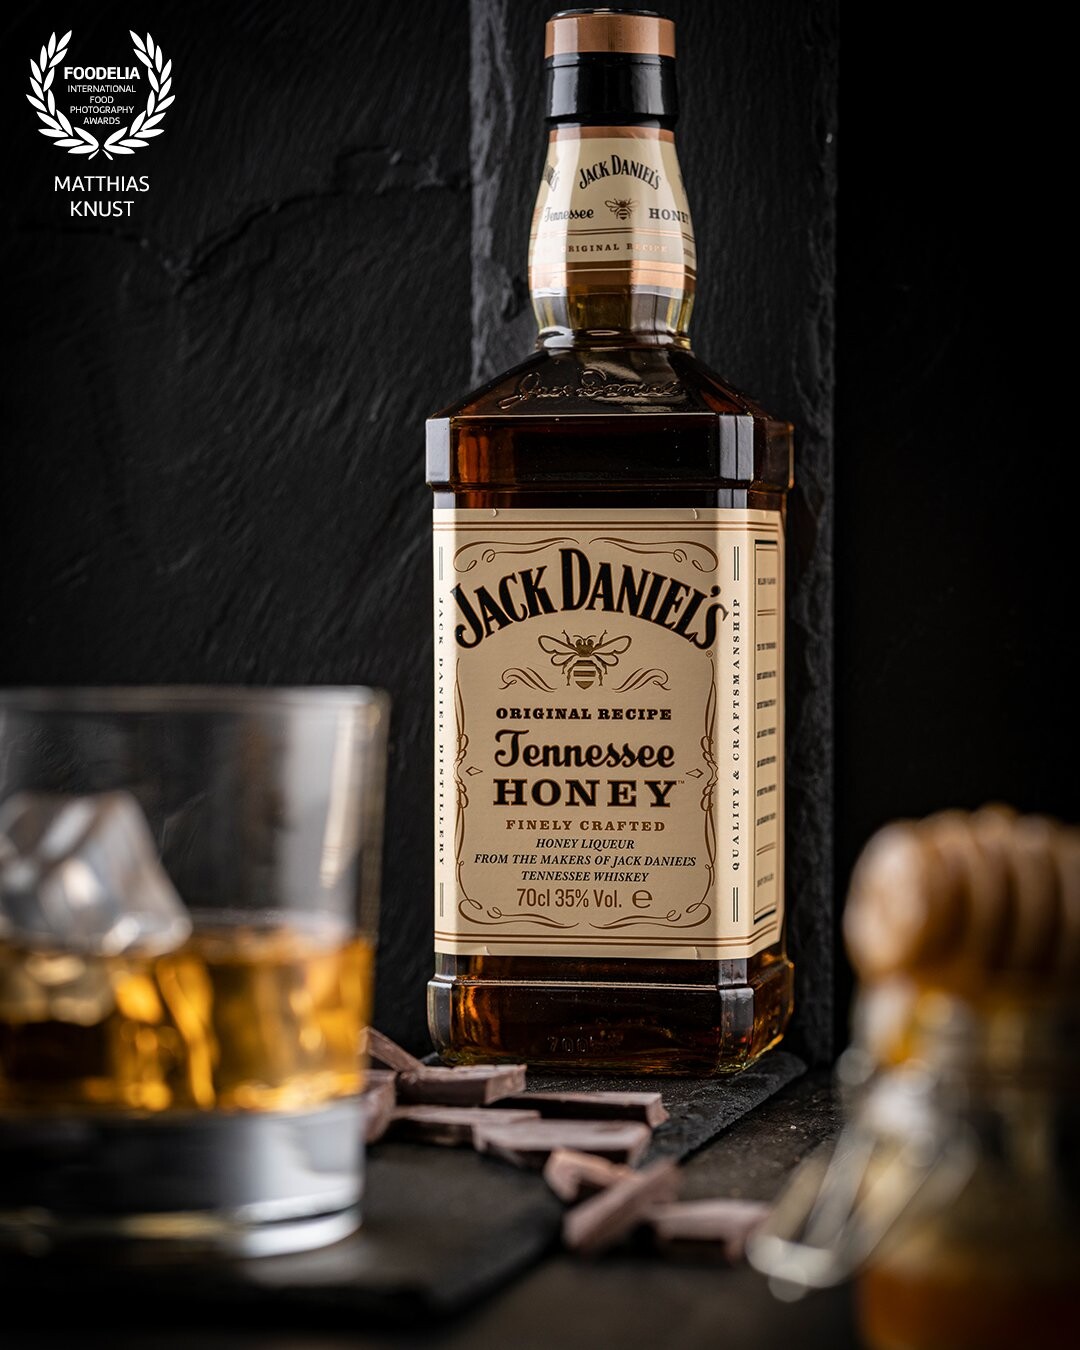 A shot of honey in the whiskey? Why not, simply put the blurring in the foreground of the image with the aperture open, with a little soft light from the left and right side. The contrast between the dark slate and the golden yellow shining whiskey makes this a wonderful eye-catcher. Are you thirsty?